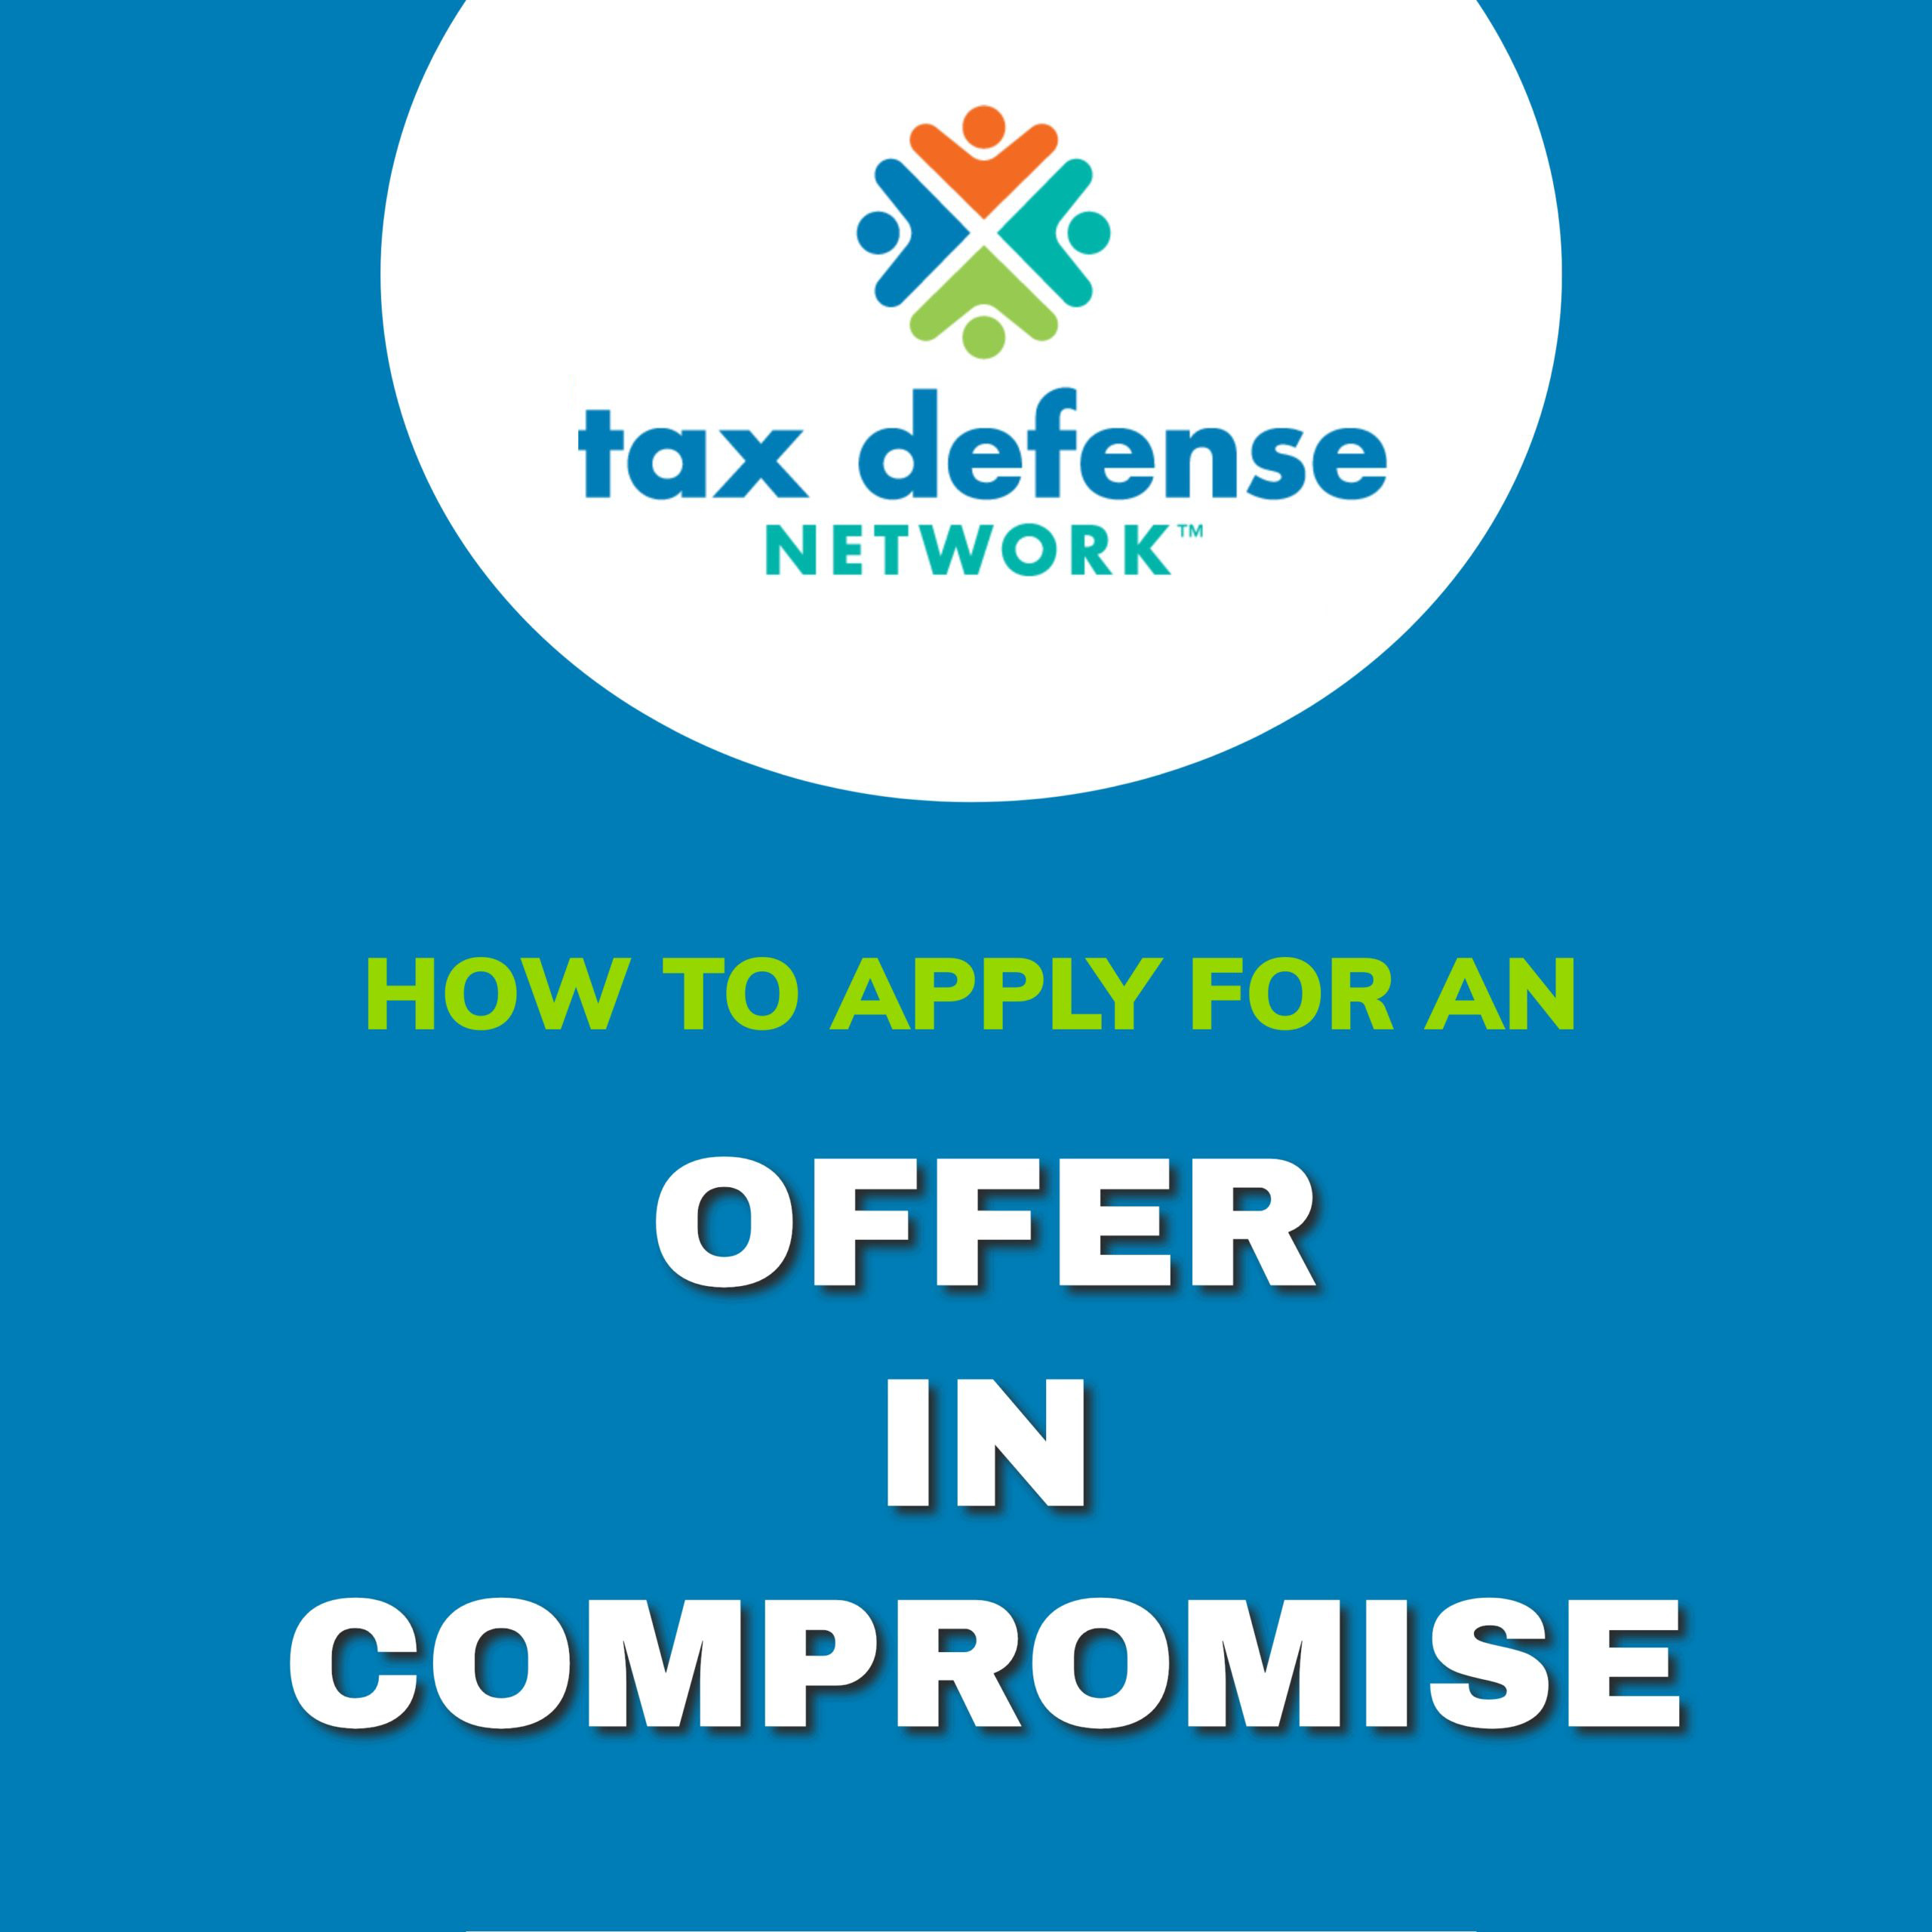 How-to-Apply-for-an-Offer-in-Compromise pdf download